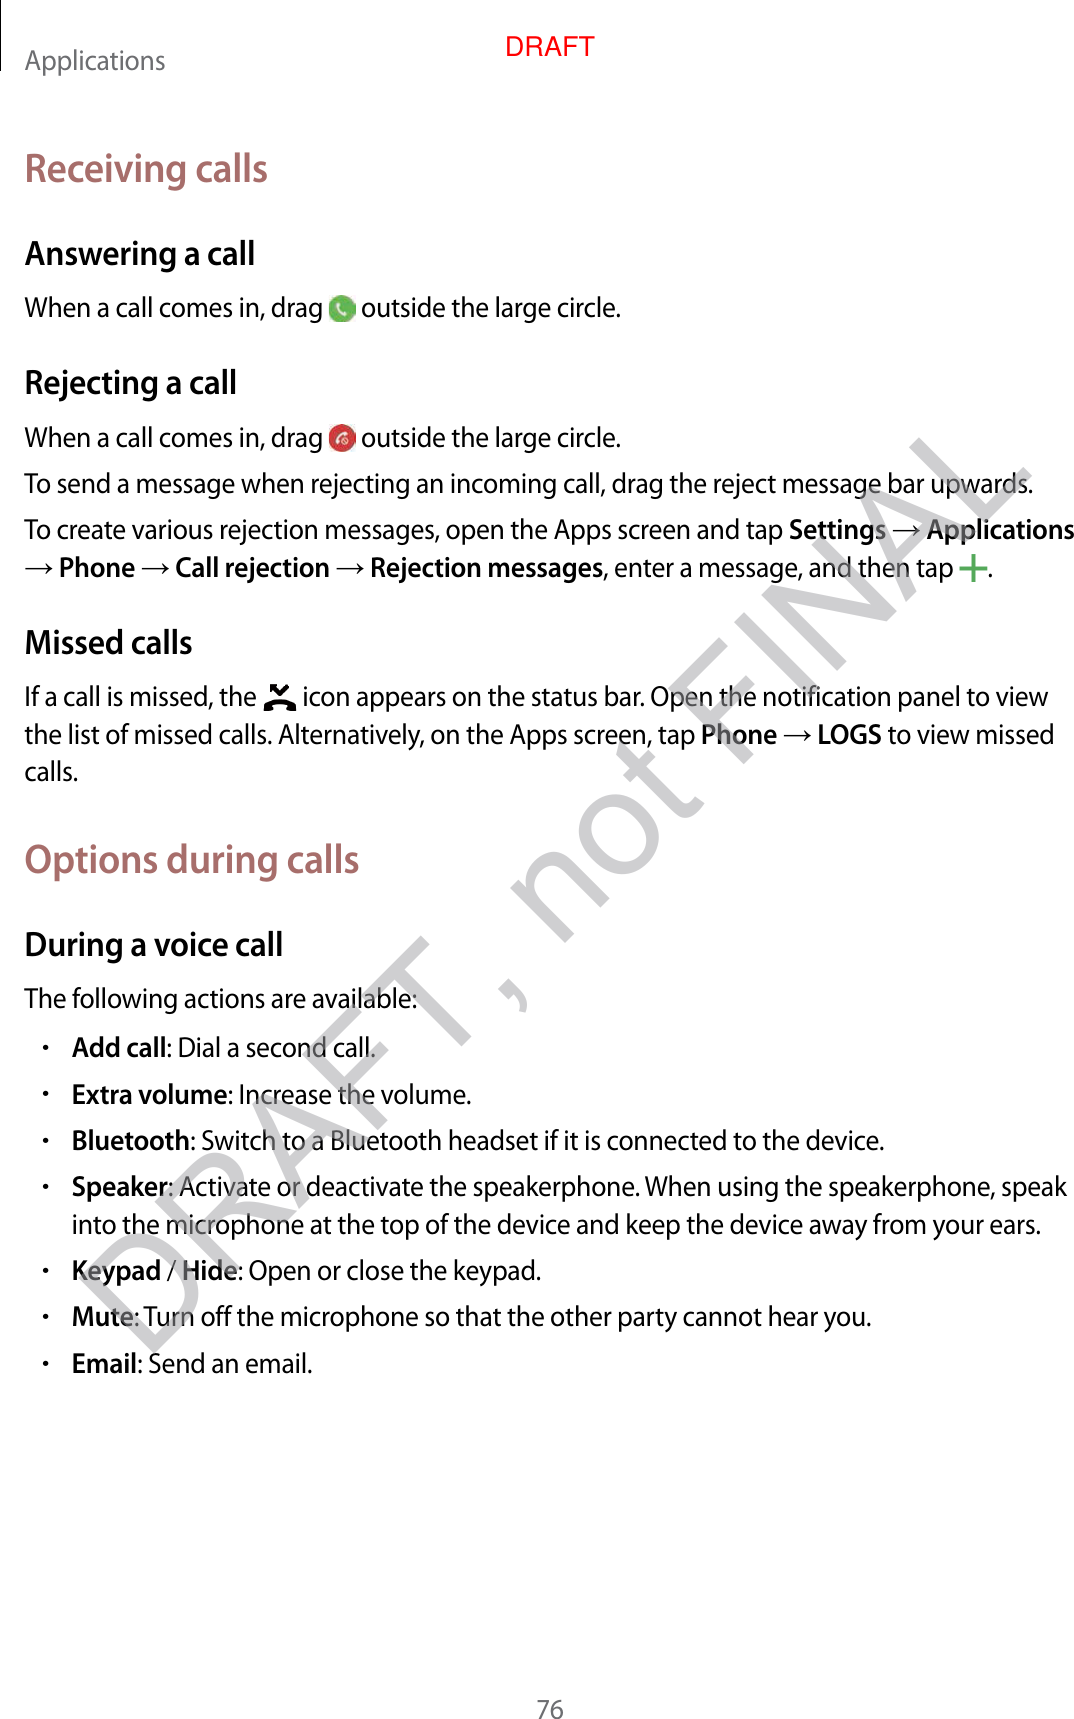 Applications76Receiving callsAnsw ering a callWhen a call comes in, drag   outside the large cir cle .Rejecting a callWhen a call comes in, drag   outside the large cir cle .To send a message when rejecting an incoming call, dr ag the r eject message bar upwards .To creat e various r ejection messages, open the Apps scr een and tap Settings  Applications  Phone  Call r ejection  Rejection messages, enter a message , and then tap  .Missed callsIf a call is missed, the   icon appears on the status bar. Open the notification panel t o view the list of missed calls. Alt ernativ ely, on the Apps scr een, tap Phone  LOGS to view missed calls.Options during callsDuring a voic e callThe f ollowing actions are a vailable:•Add call: Dial a second call.•Extra volume: Increase the volume .•Bluetooth: Switch t o a Bluetooth headset if it is c onnected to the device.•Speaker: Activate or deactivate the speakerphone . When using the speakerphone , speak into the micr ophone at the t op of the device and keep the devic e a wa y fr om y our ears .•Keypad / Hide: Open or close the keypad.•Mute: Turn off the microphone so tha t the other party cannot hear you.•Email: Send an email.DRAFT, not FINALDRAFT